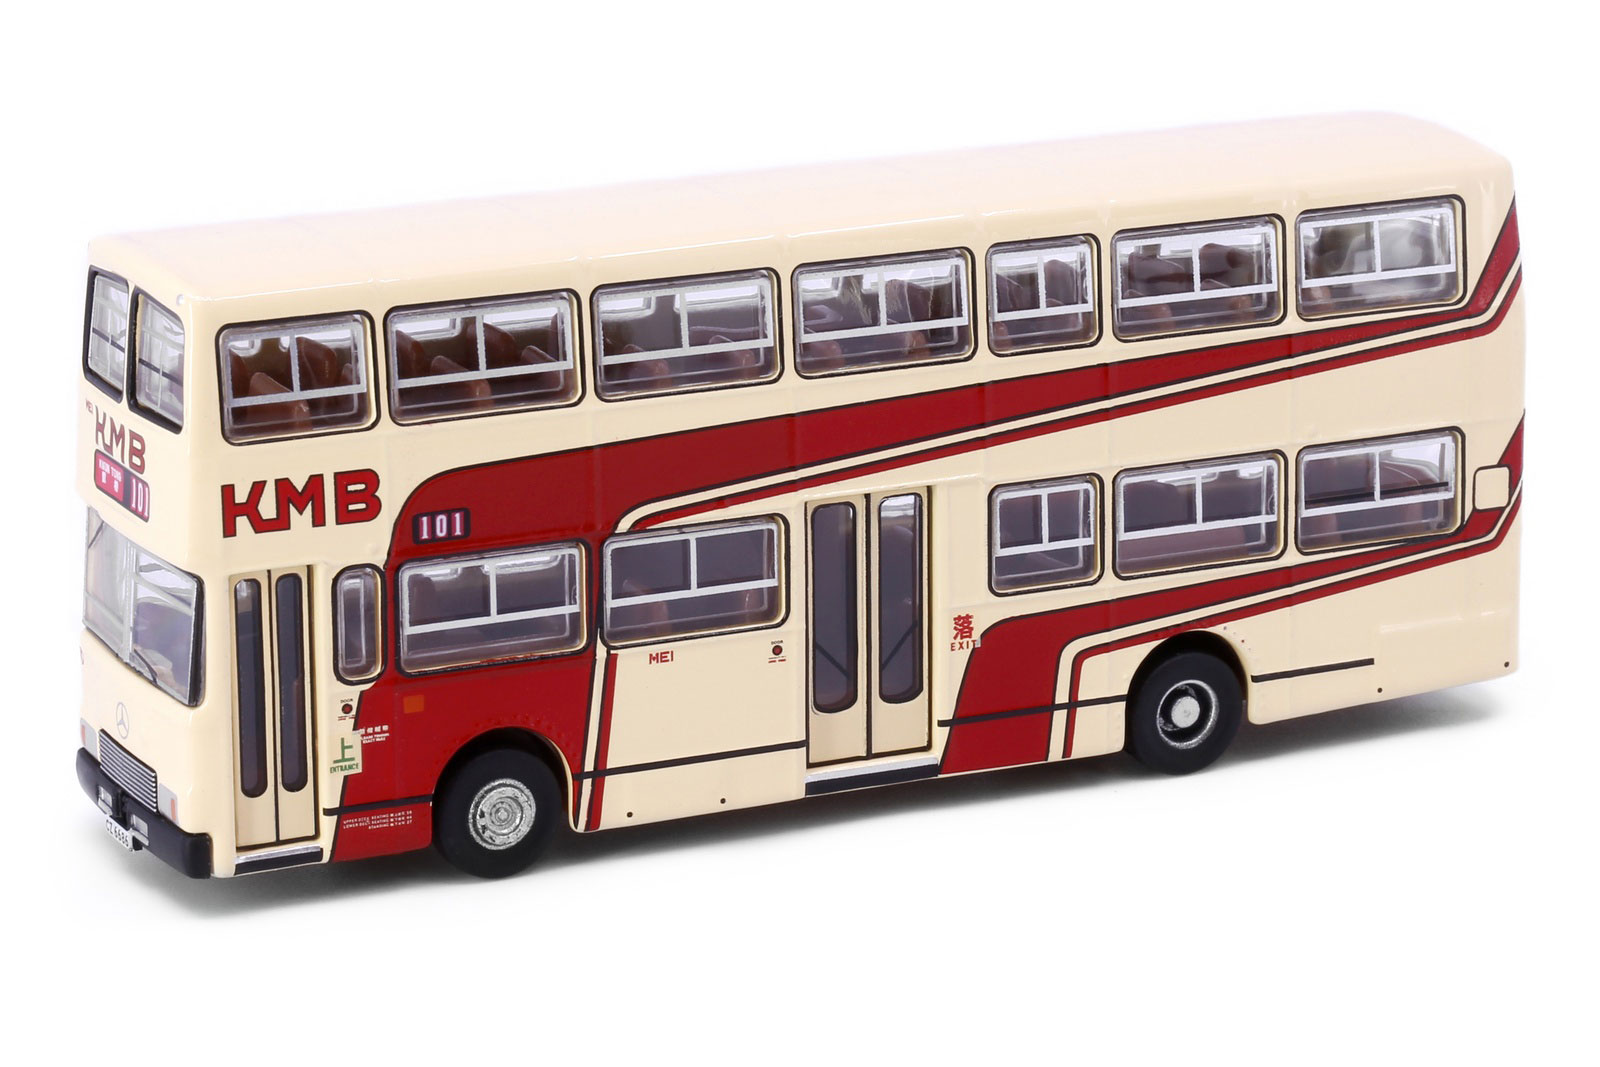 Tiny 1/110 scale model buses - Tiny 'box' number